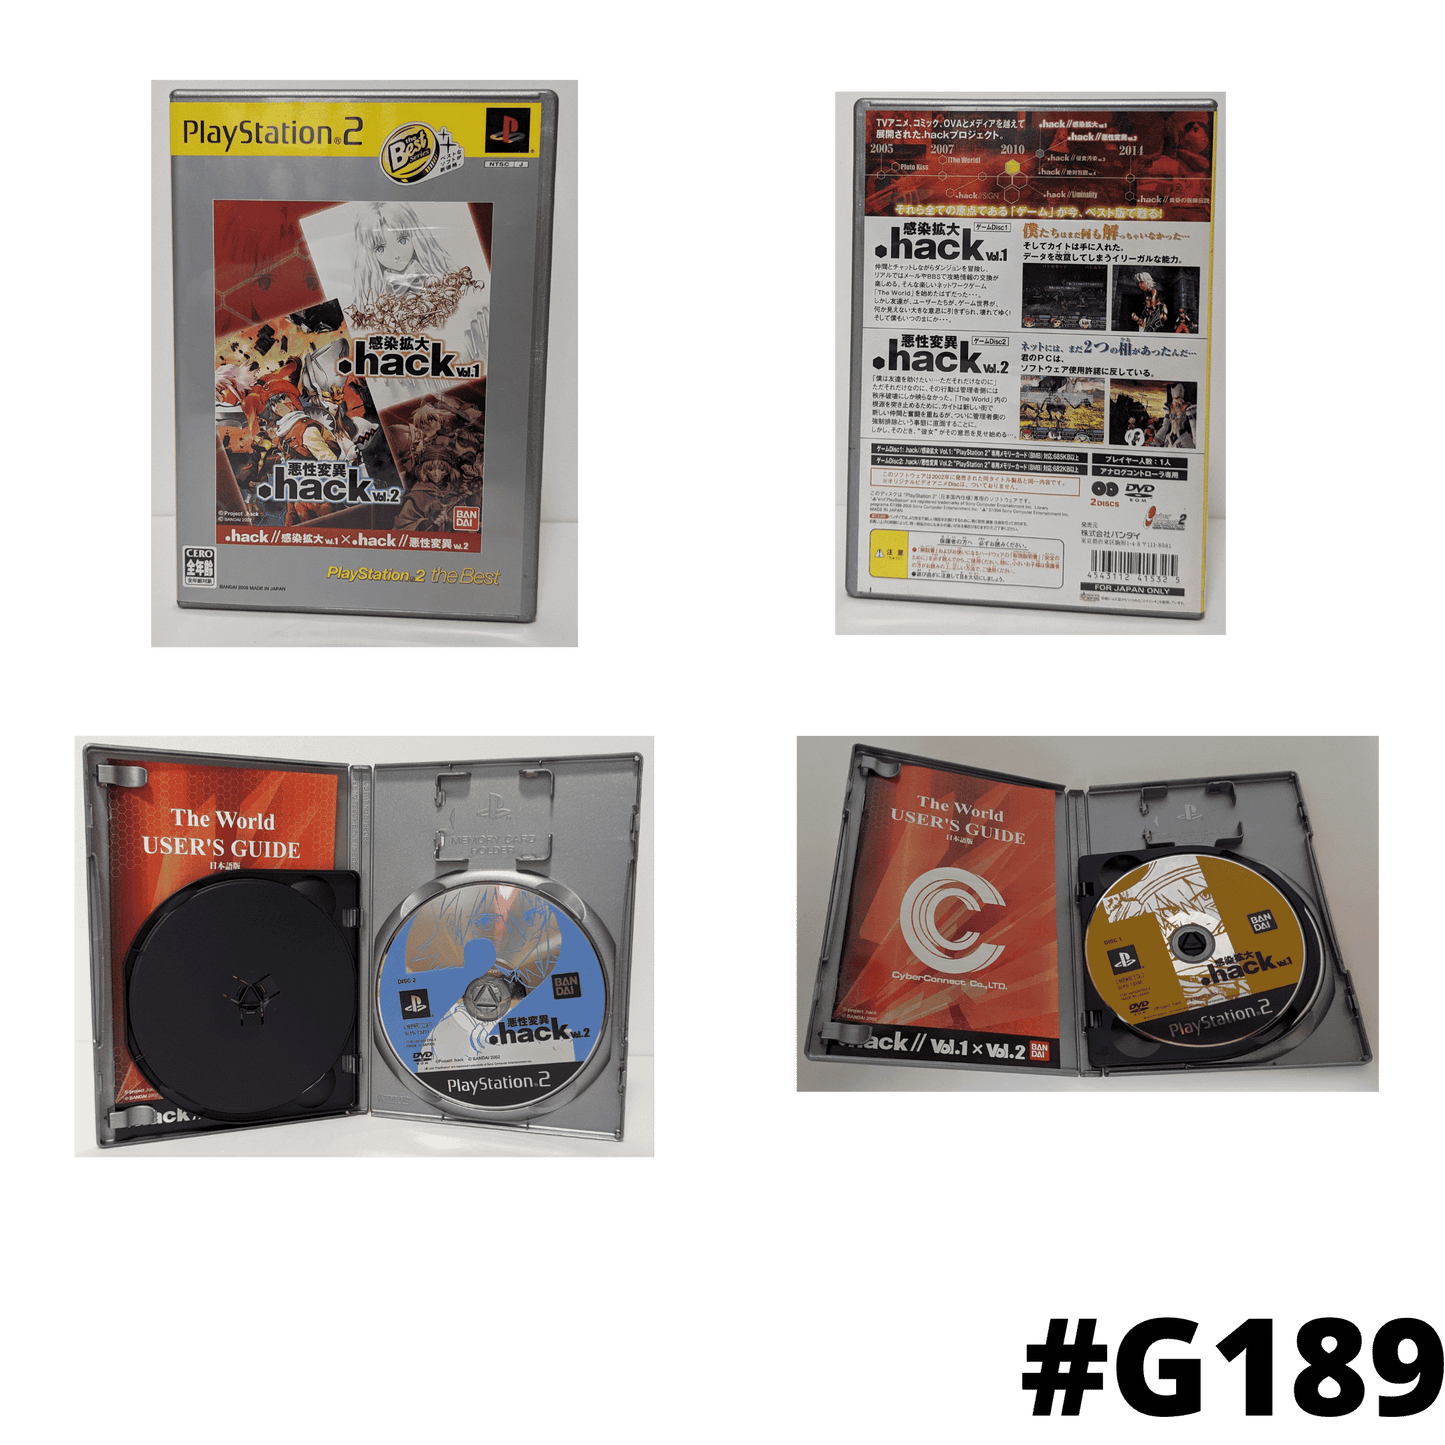 .hack vol 1 e 2 | PlayStation 2 | giapponese ChitoroShop